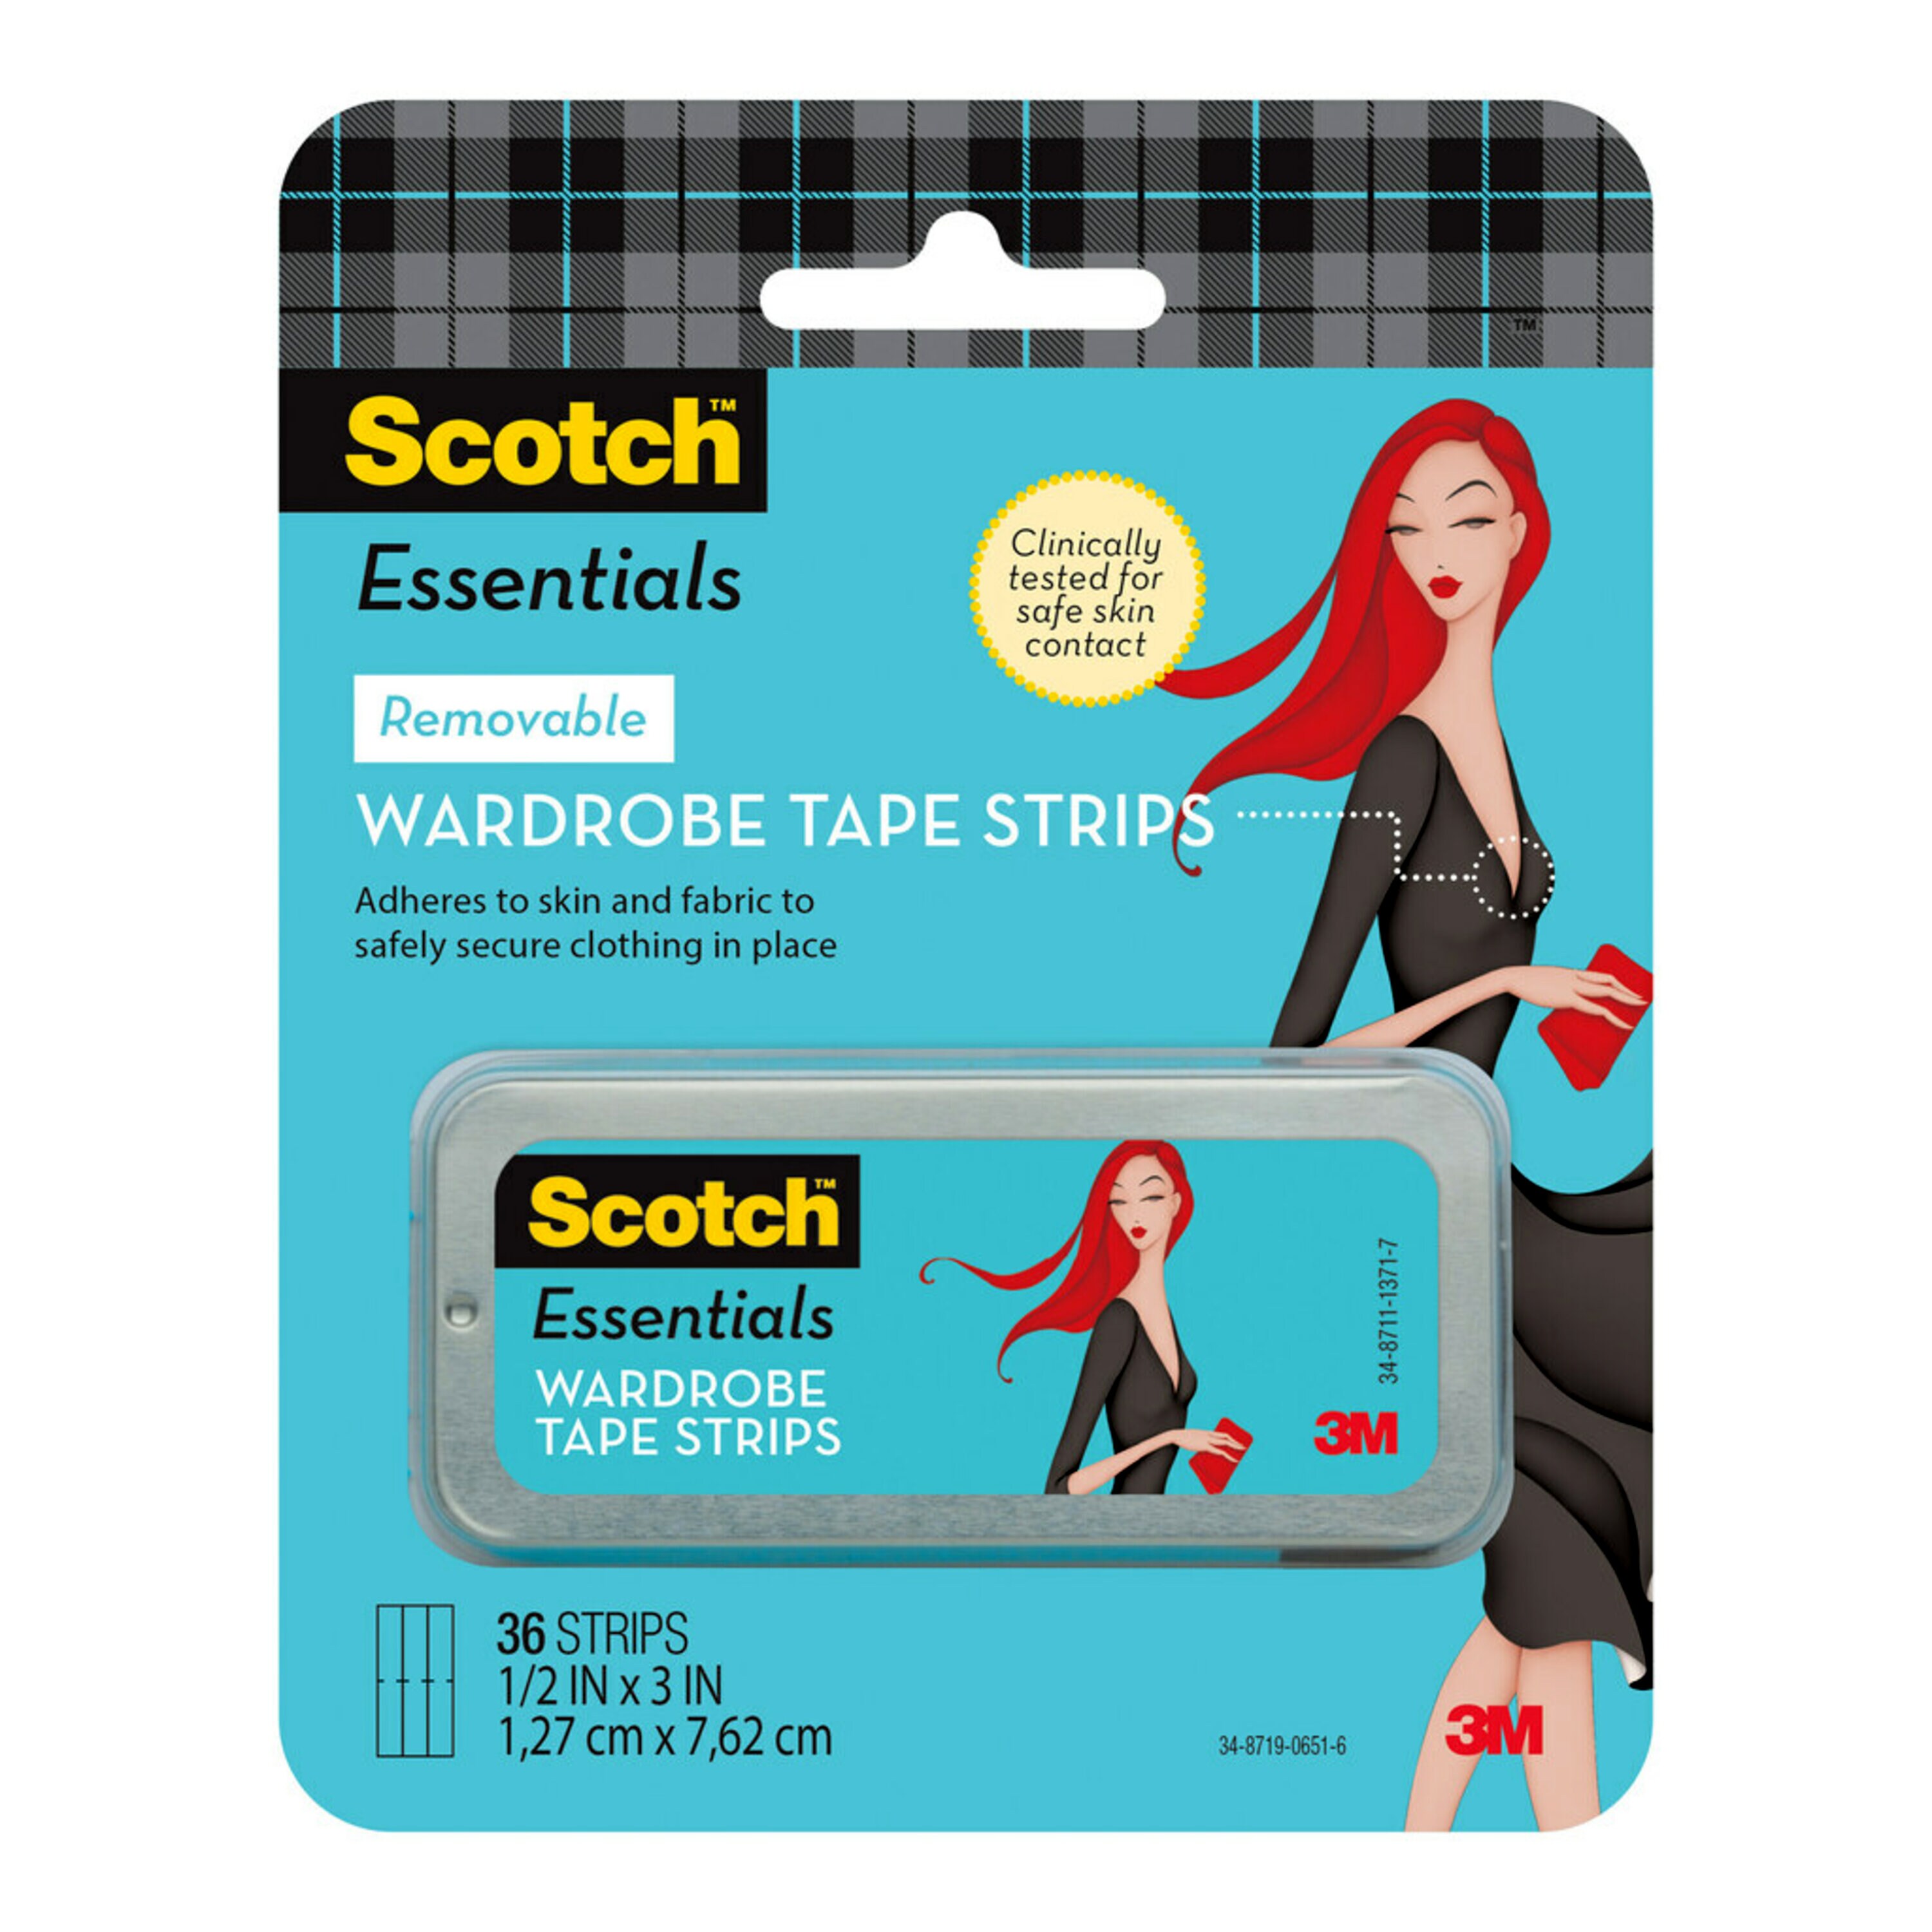 Scotch™ Essentials Wardrobe Tape Strips, 1/2 in x 3 in, 36/Pack - image 1 of 3